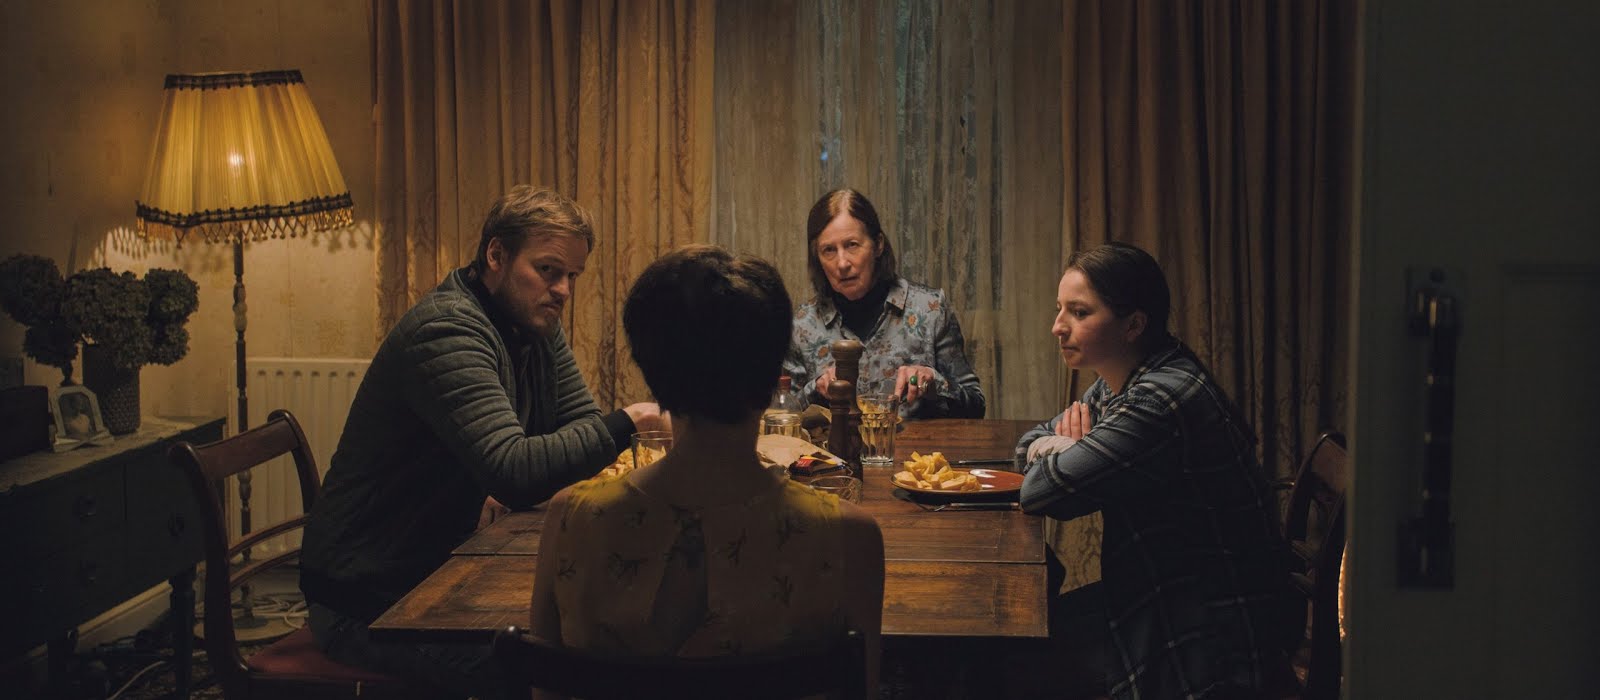 Kate Dolan on her debut feature film, psychological thriller You Are Not My Mother